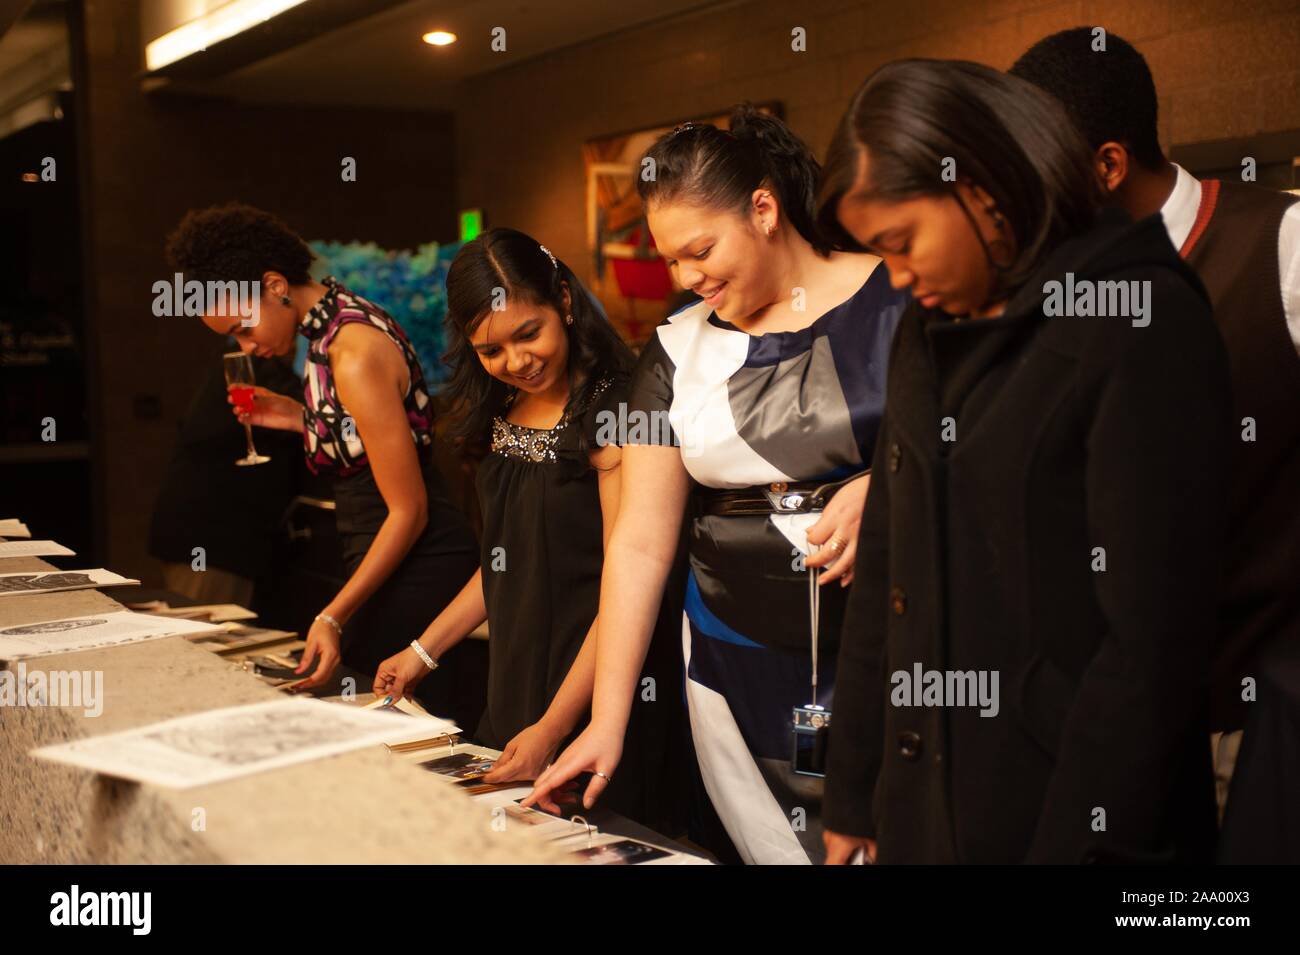 Guests view papers on a table during a Black History Month event at the Johns Hopkins University in Baltimore, Maryland, January 31, 2009. From the Homewood Photography collection. () Stock Photo